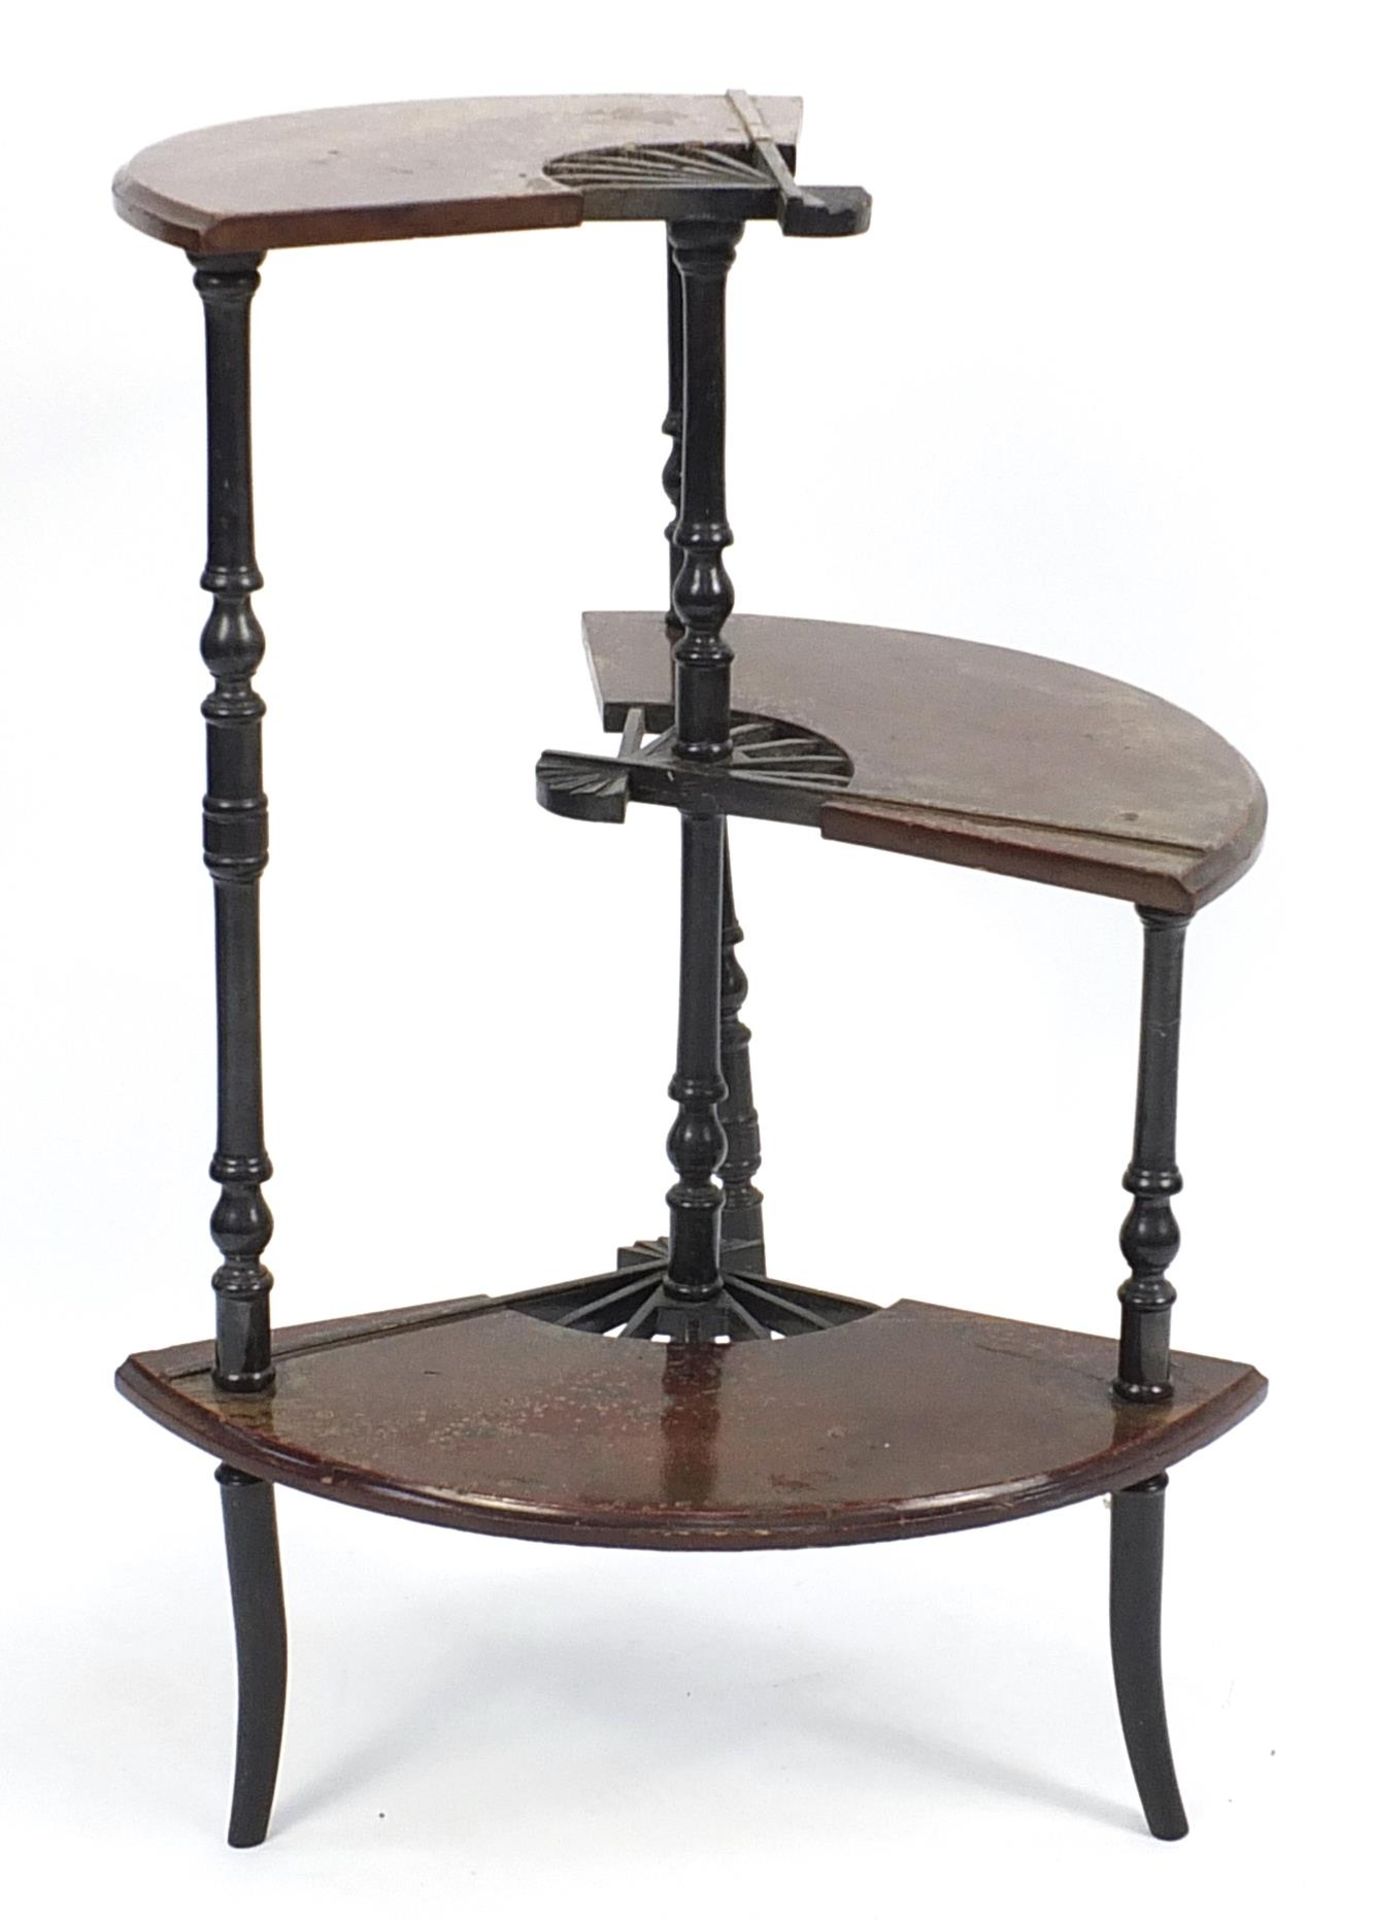 Japanese lacquered three tier stand in the form of fans, 83cm H x 58cm in diameter